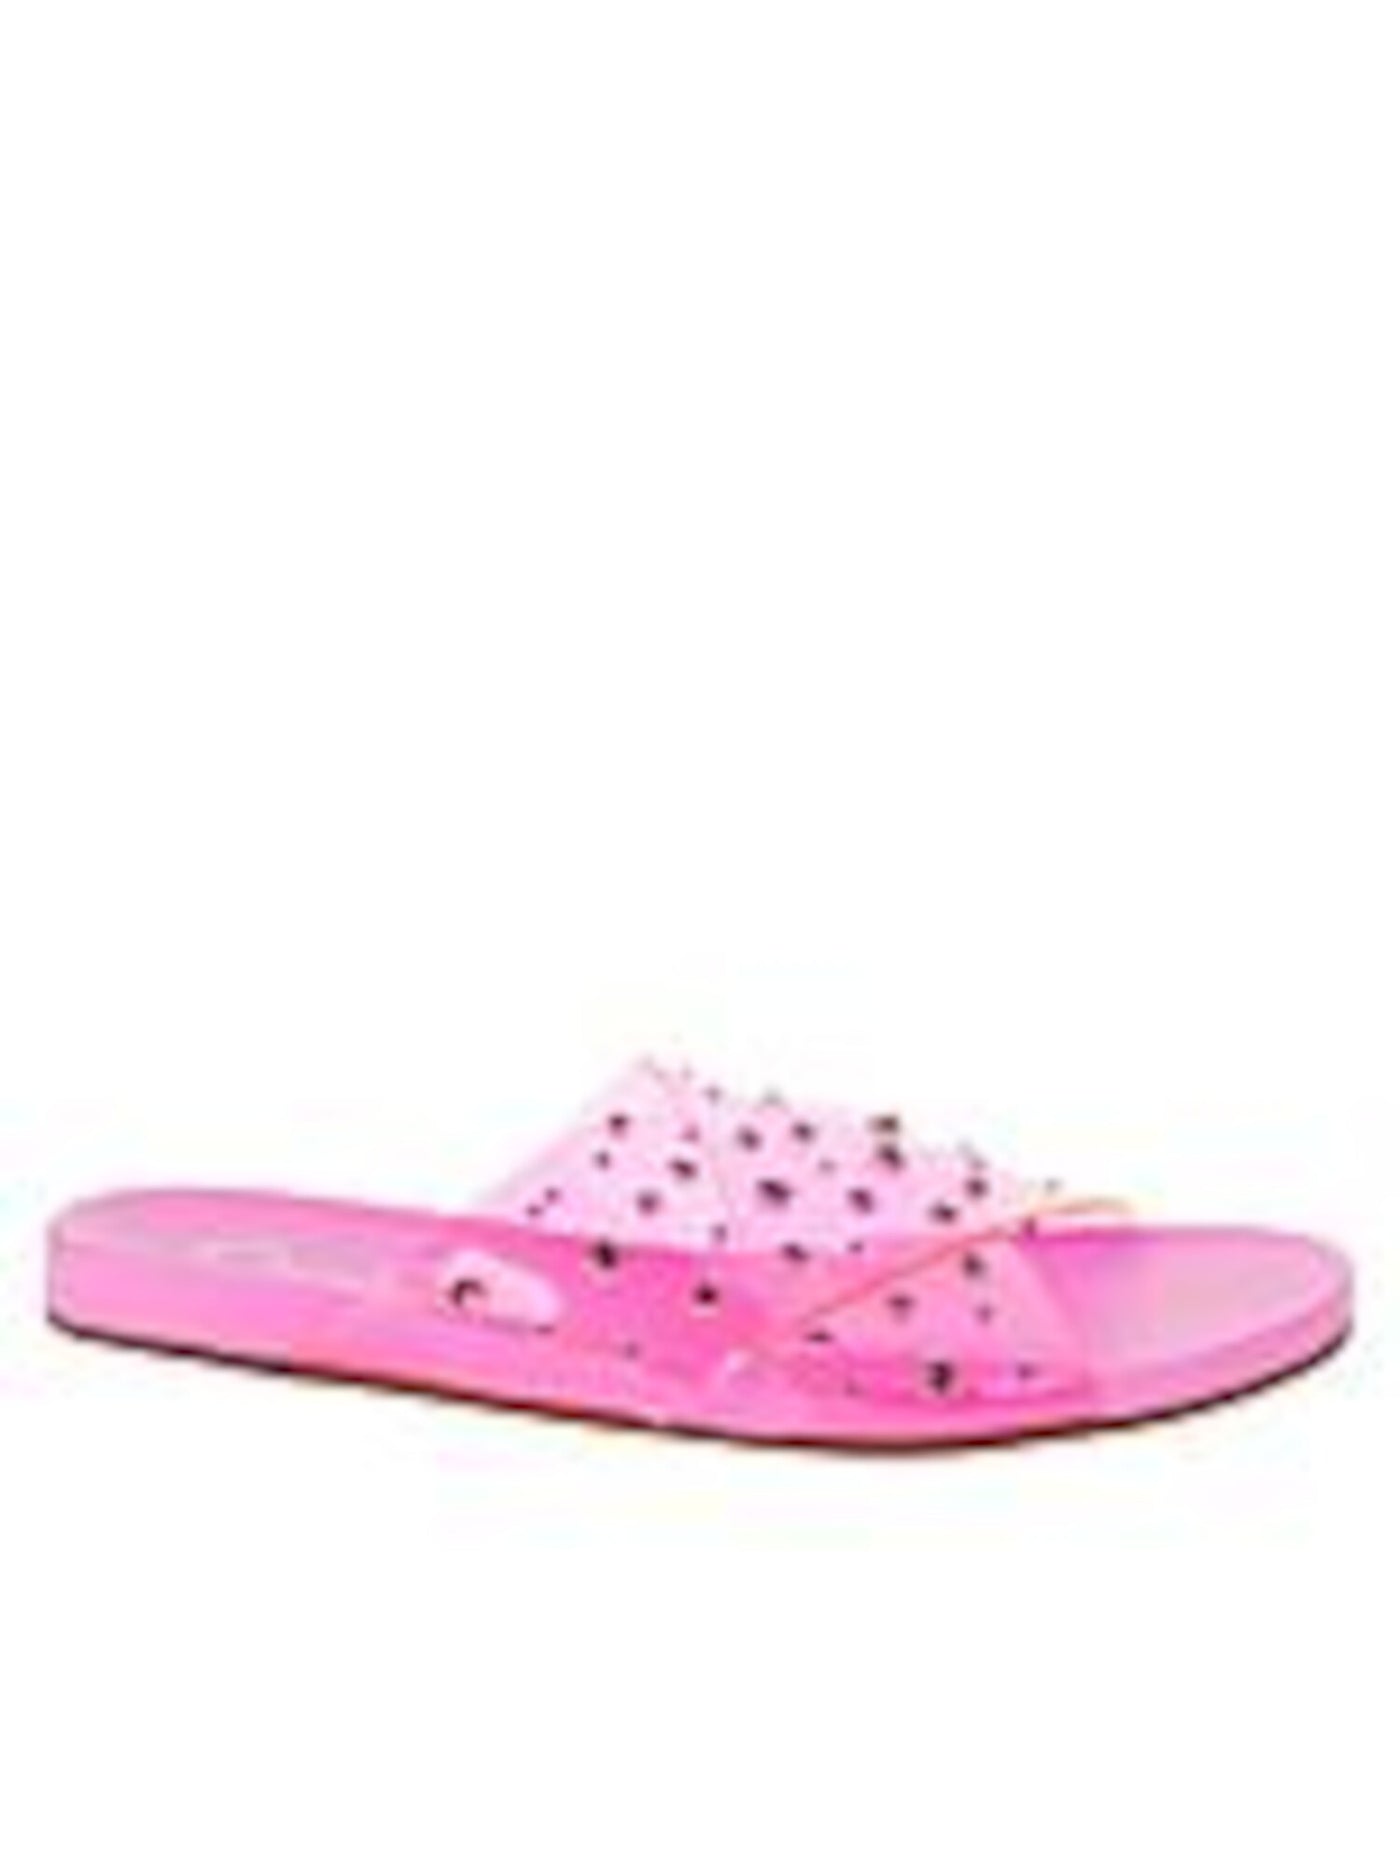 JESSICA SIMPSON Womens Pink Clear Lucite Straps Embellished Studded Tislie Round Toe Slip On Slide Sandals Shoes 6 M